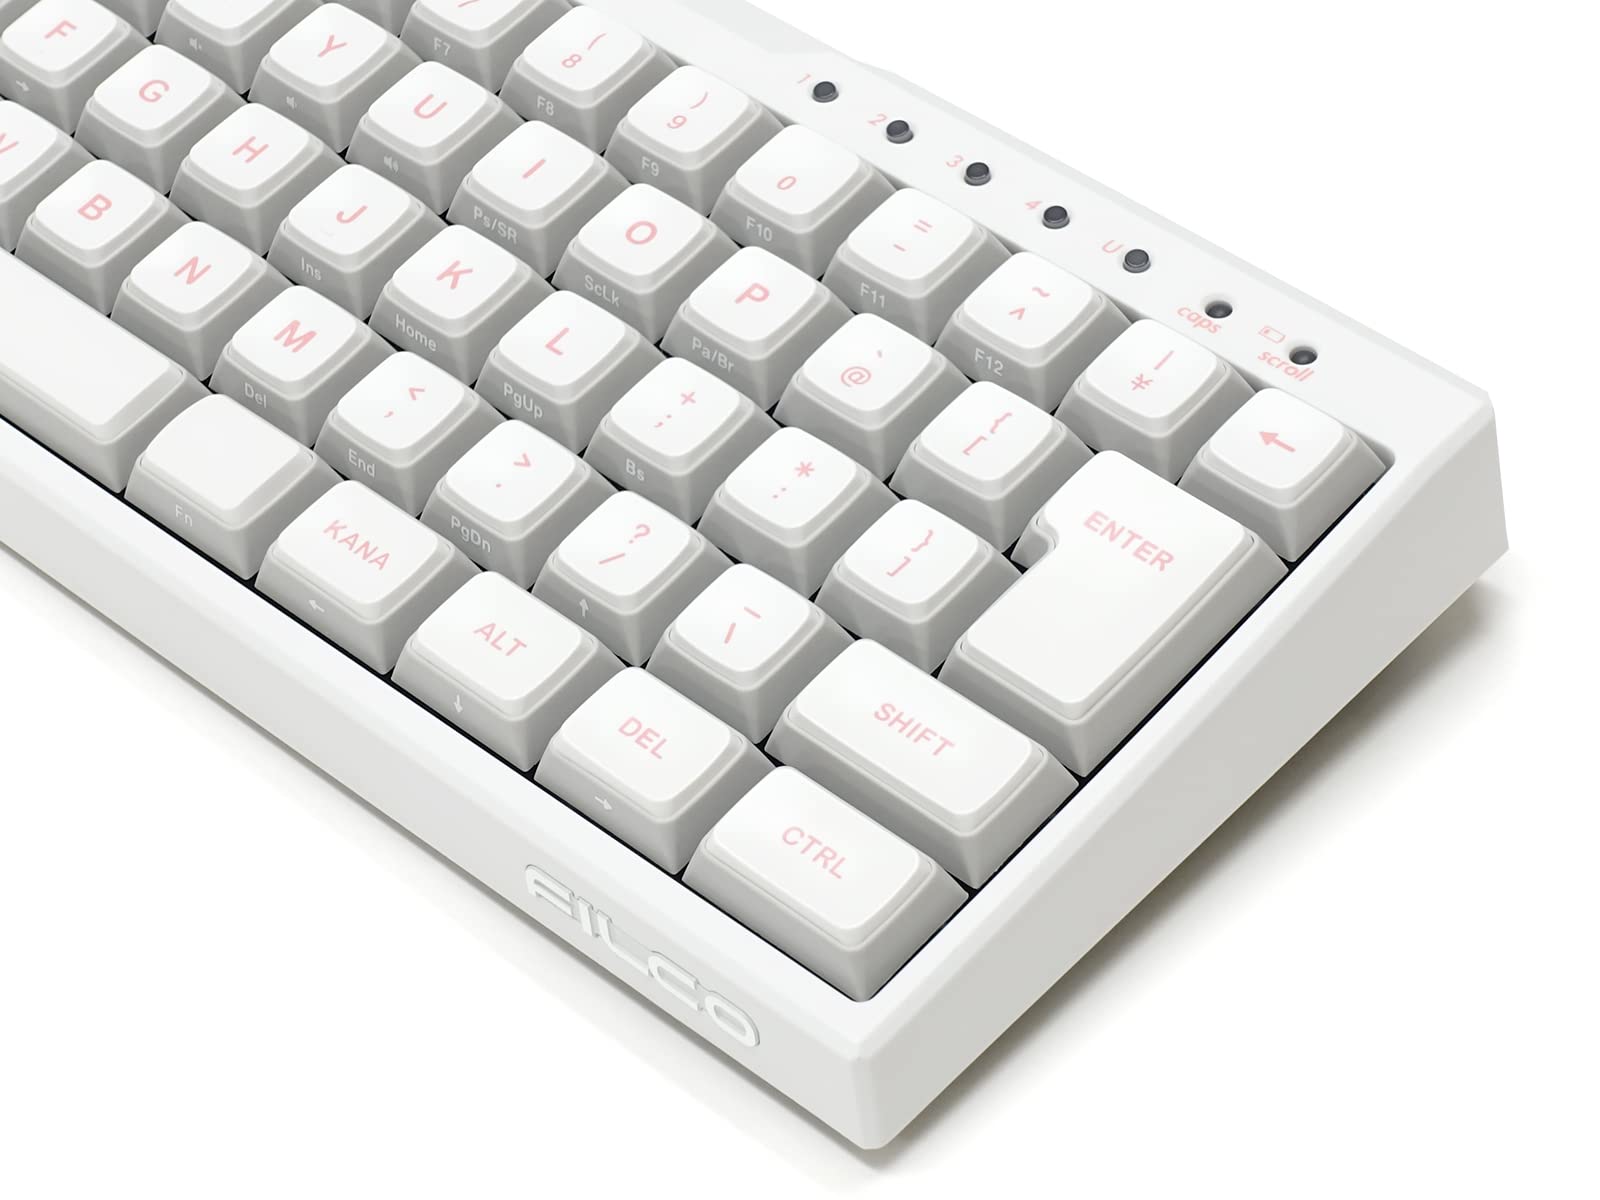 Filco Majestouch MINILA-R Convertible Quiet Red Axis White Mechanical Keyboard, Japanese Layout, 66 Keys, Bluetooth Wireless, USB Wired Compatible, DIP Switch, Compact Keyboard